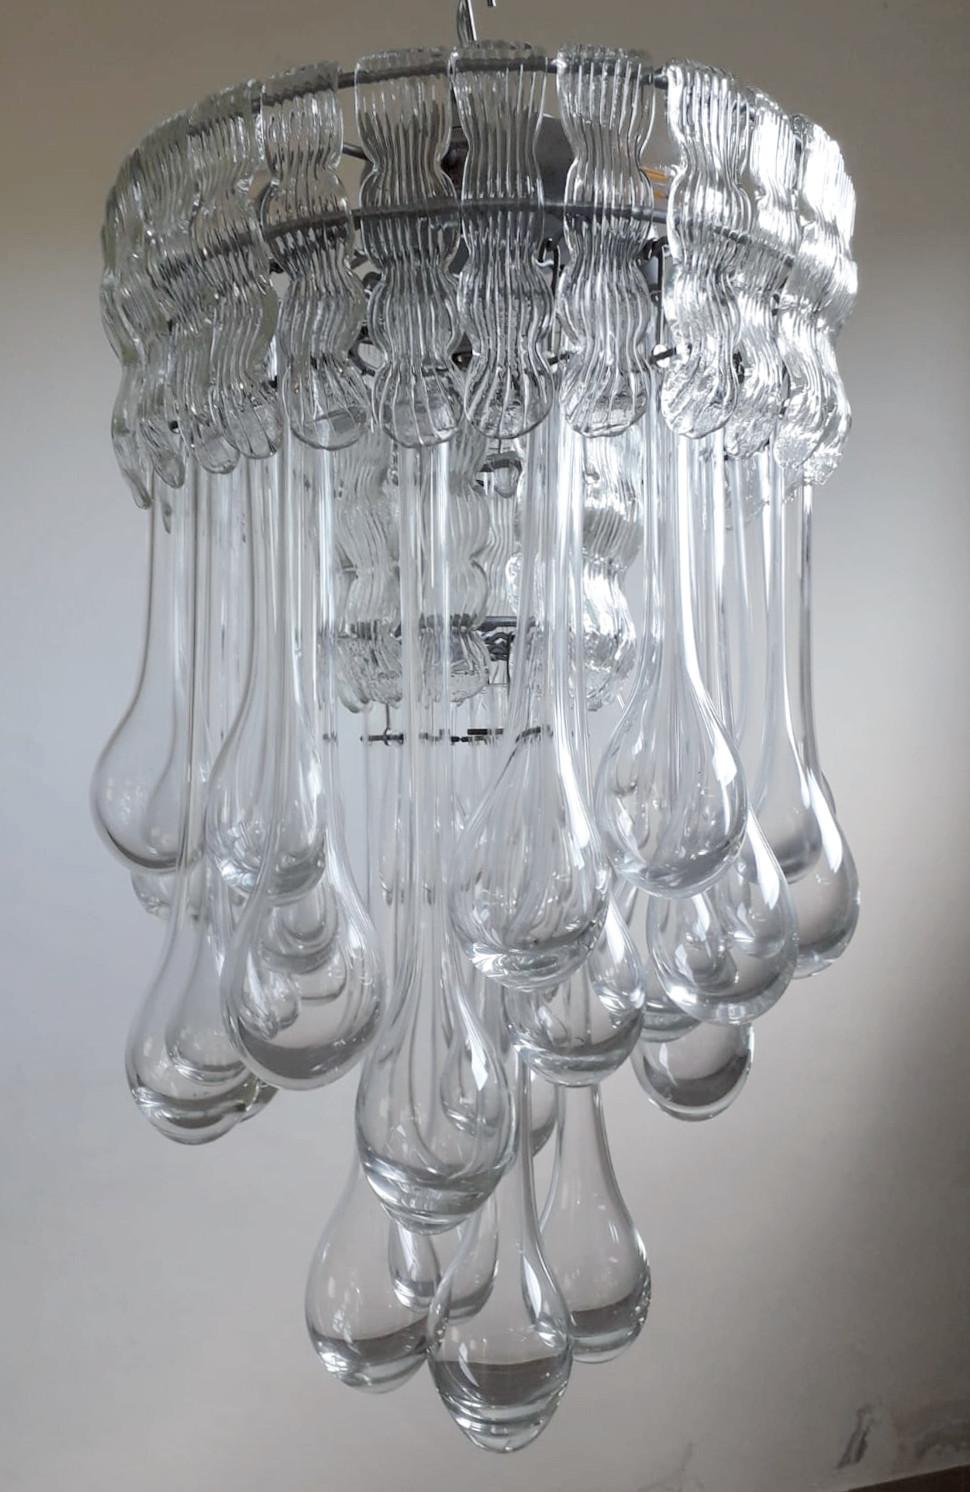 Vintage Italian chandelier or flush mount with clear Murano glass drops layered with curved glass leave / Made in Italy, circa 1960s.
Measures: diameter 19 inches, height 27.5 inches plus chain and canopy
5 lights / E26 or E27 type / max 60W each
4